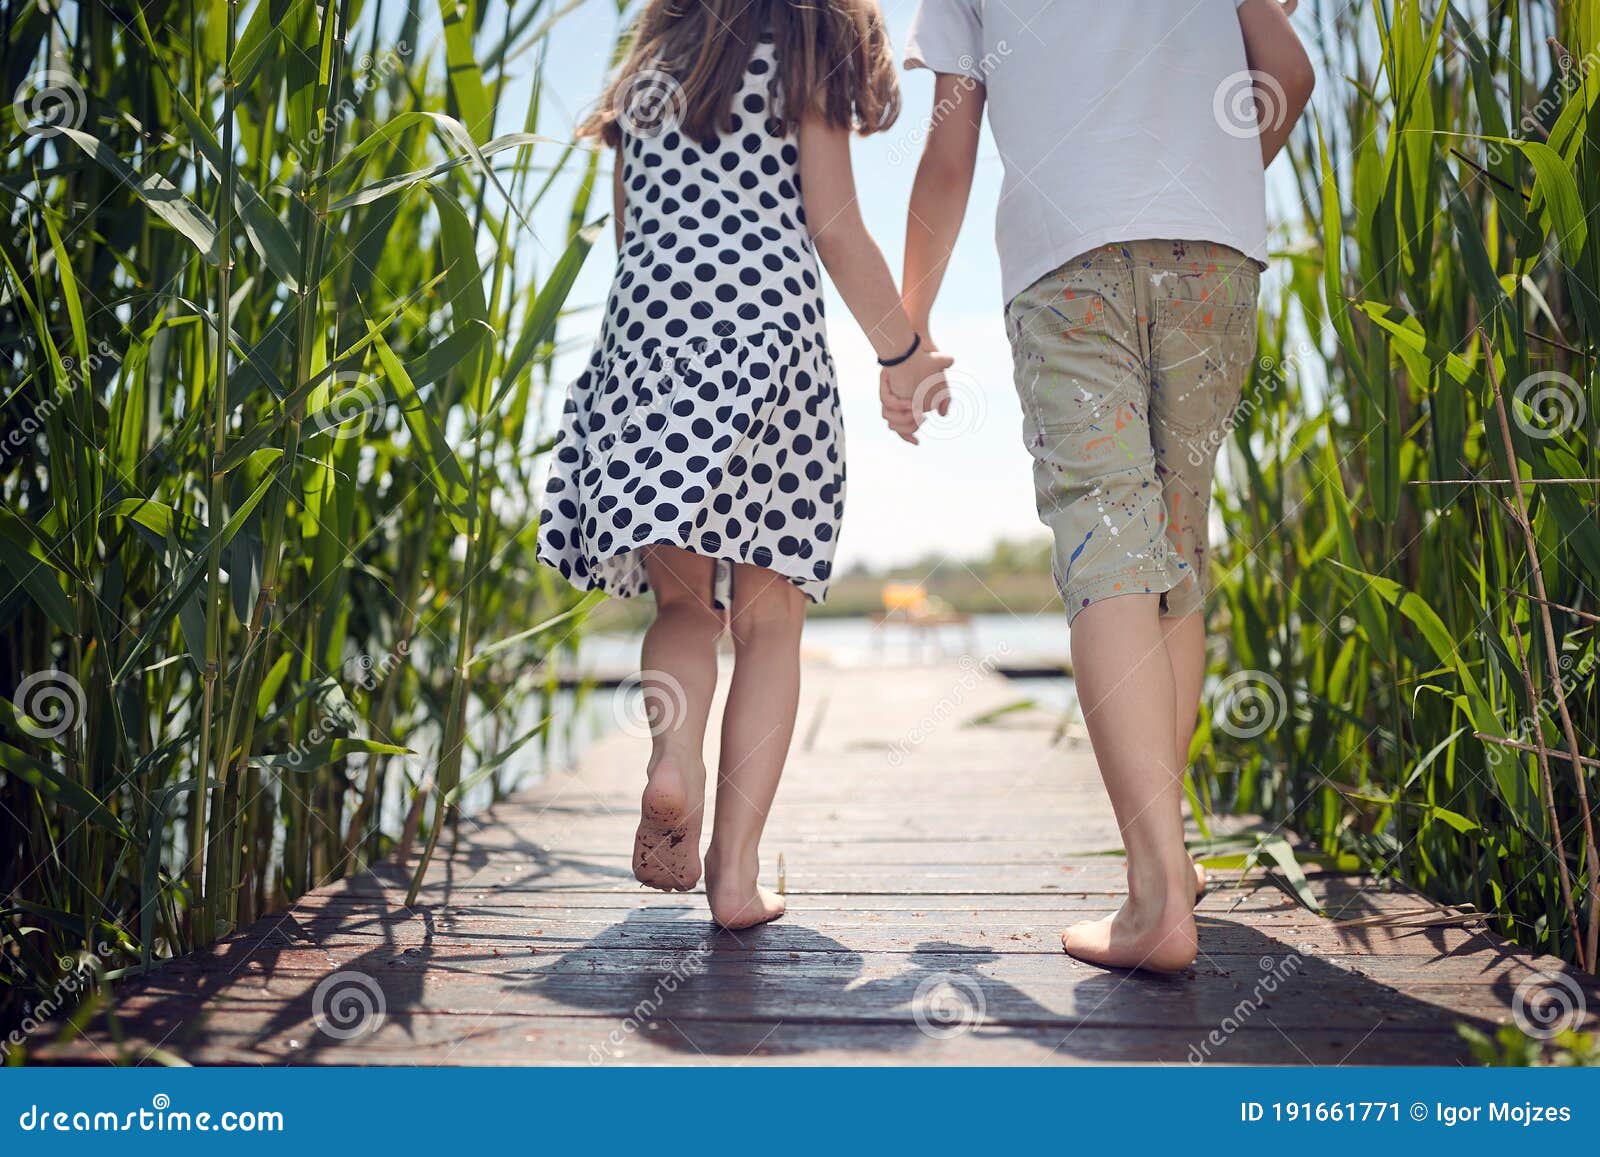 Cropped Image Of Boy And Girl Holding Hands Running Barefoot On Wooden Platform Toward The Water Stock Image Image Of Female Nature